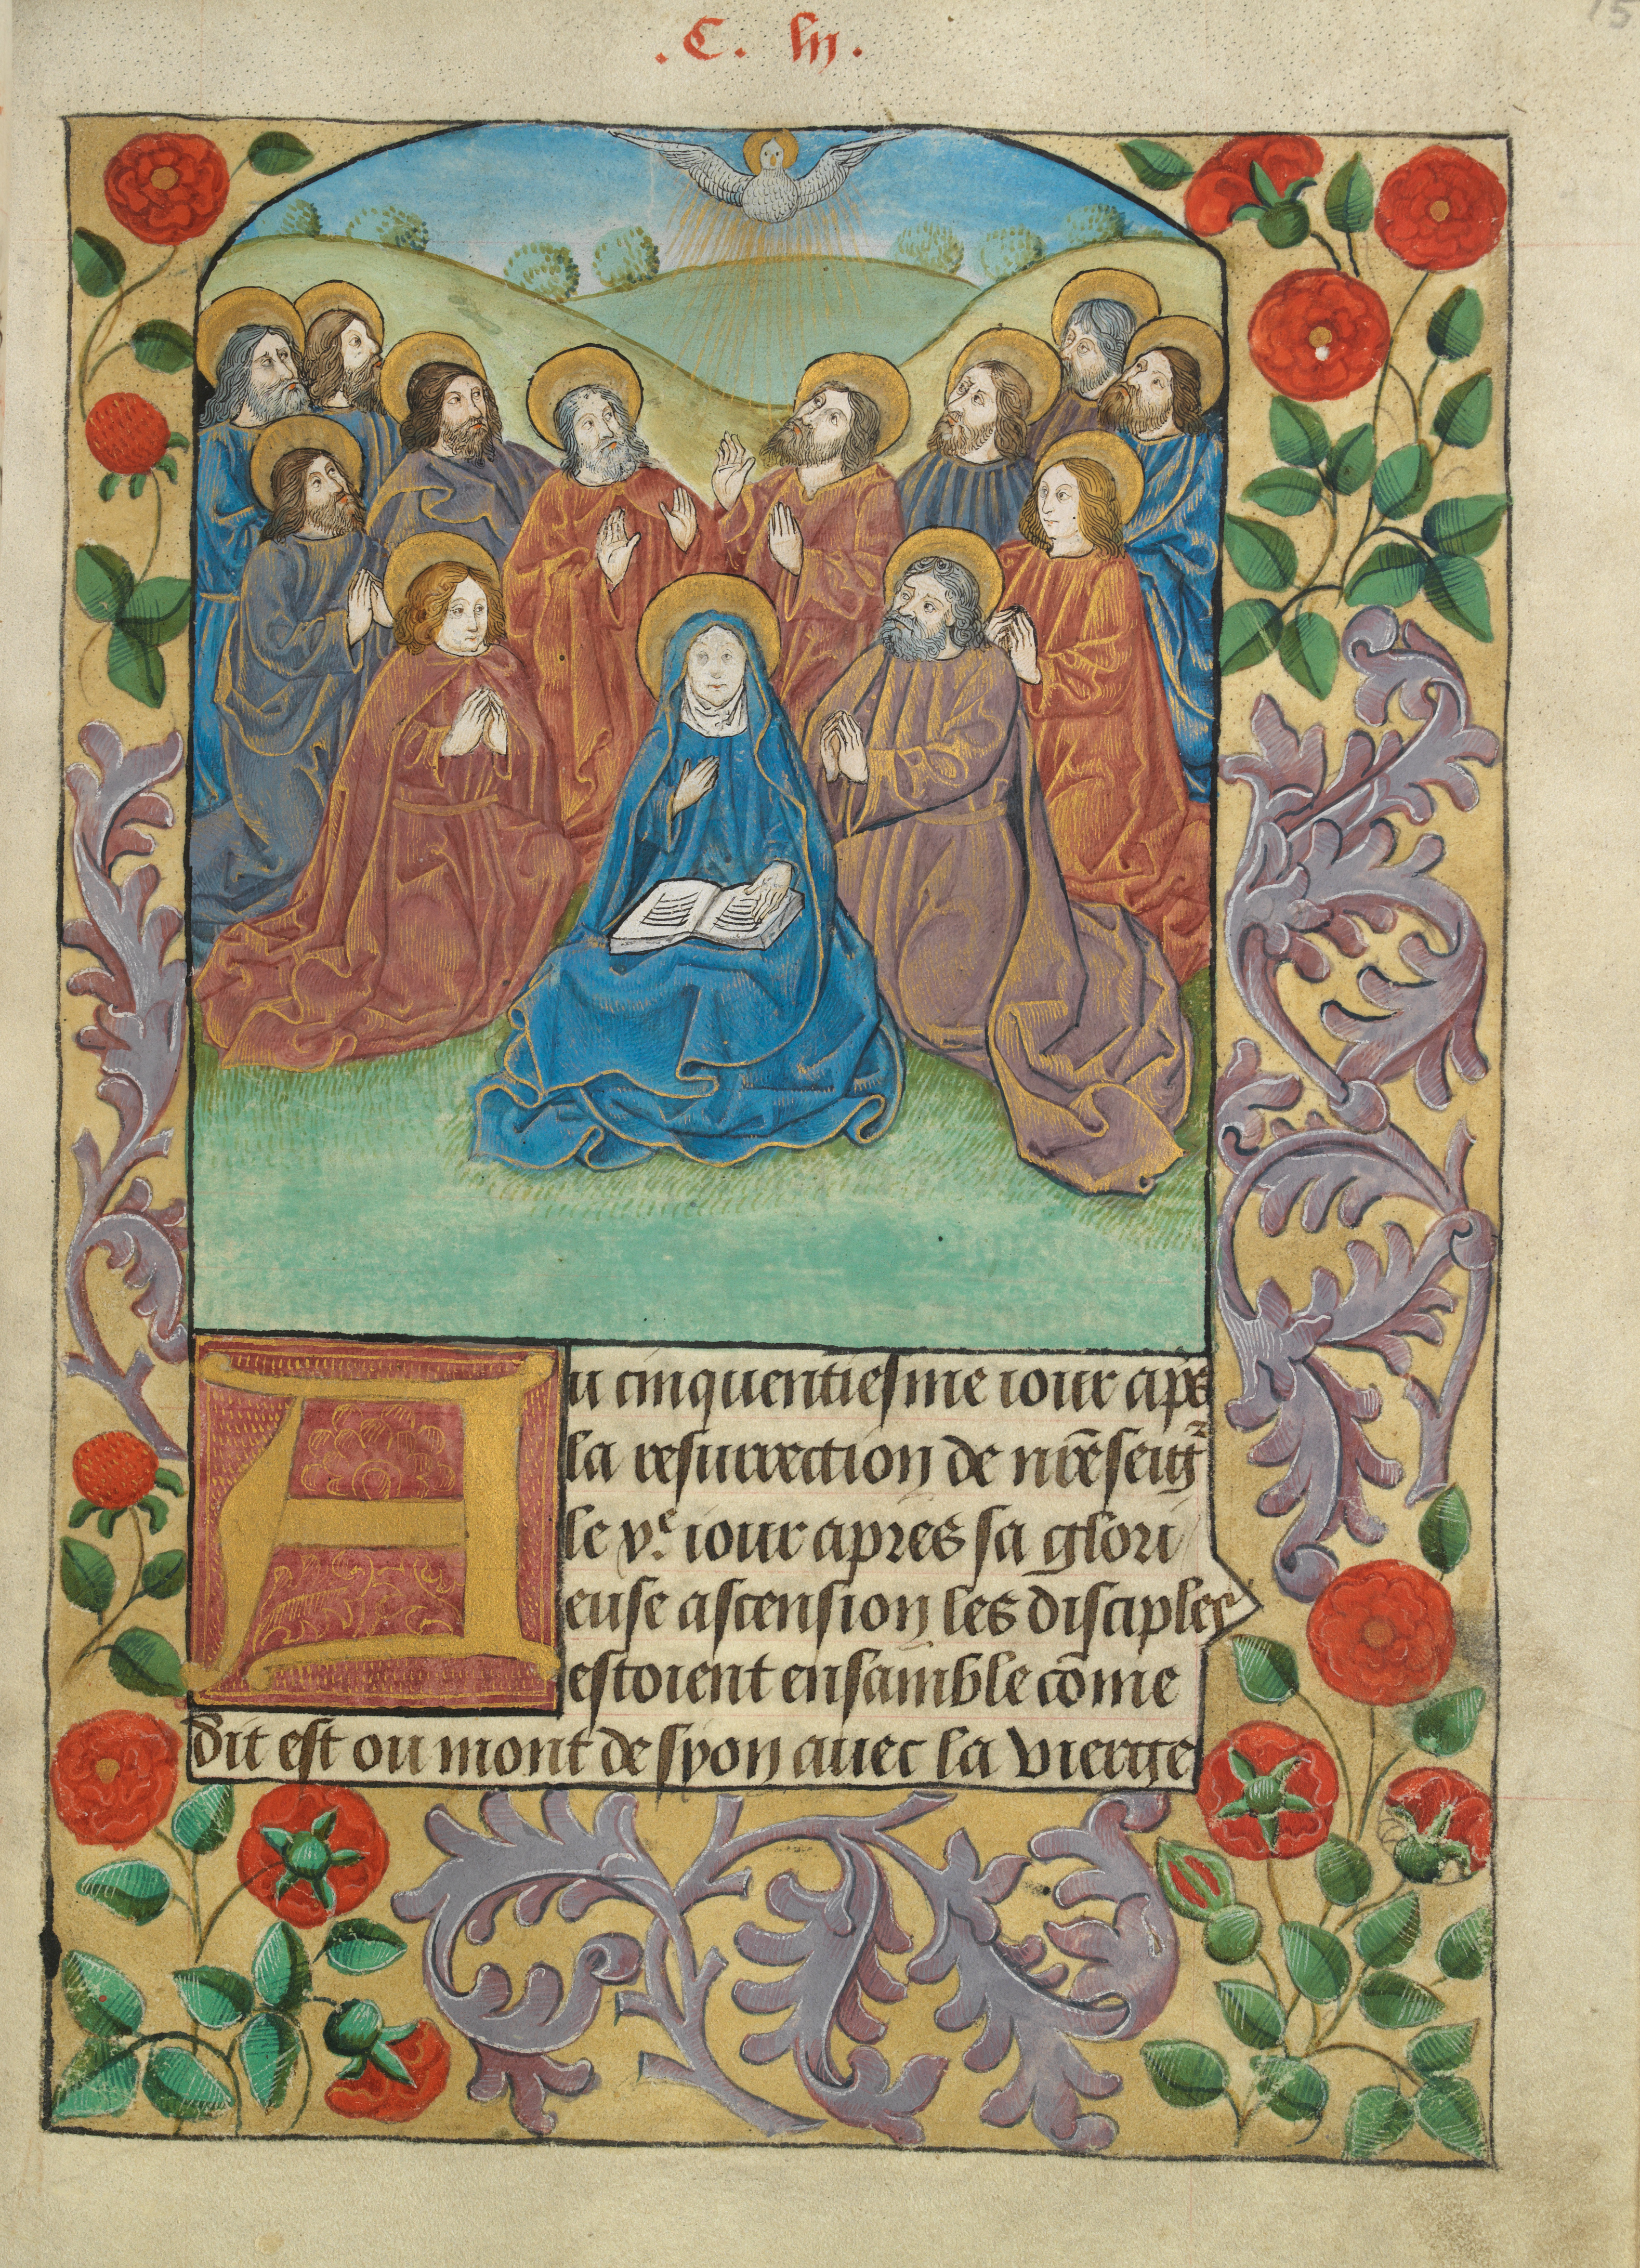 Pentecost descent of the Holy Ghost as a dove (f. 151)